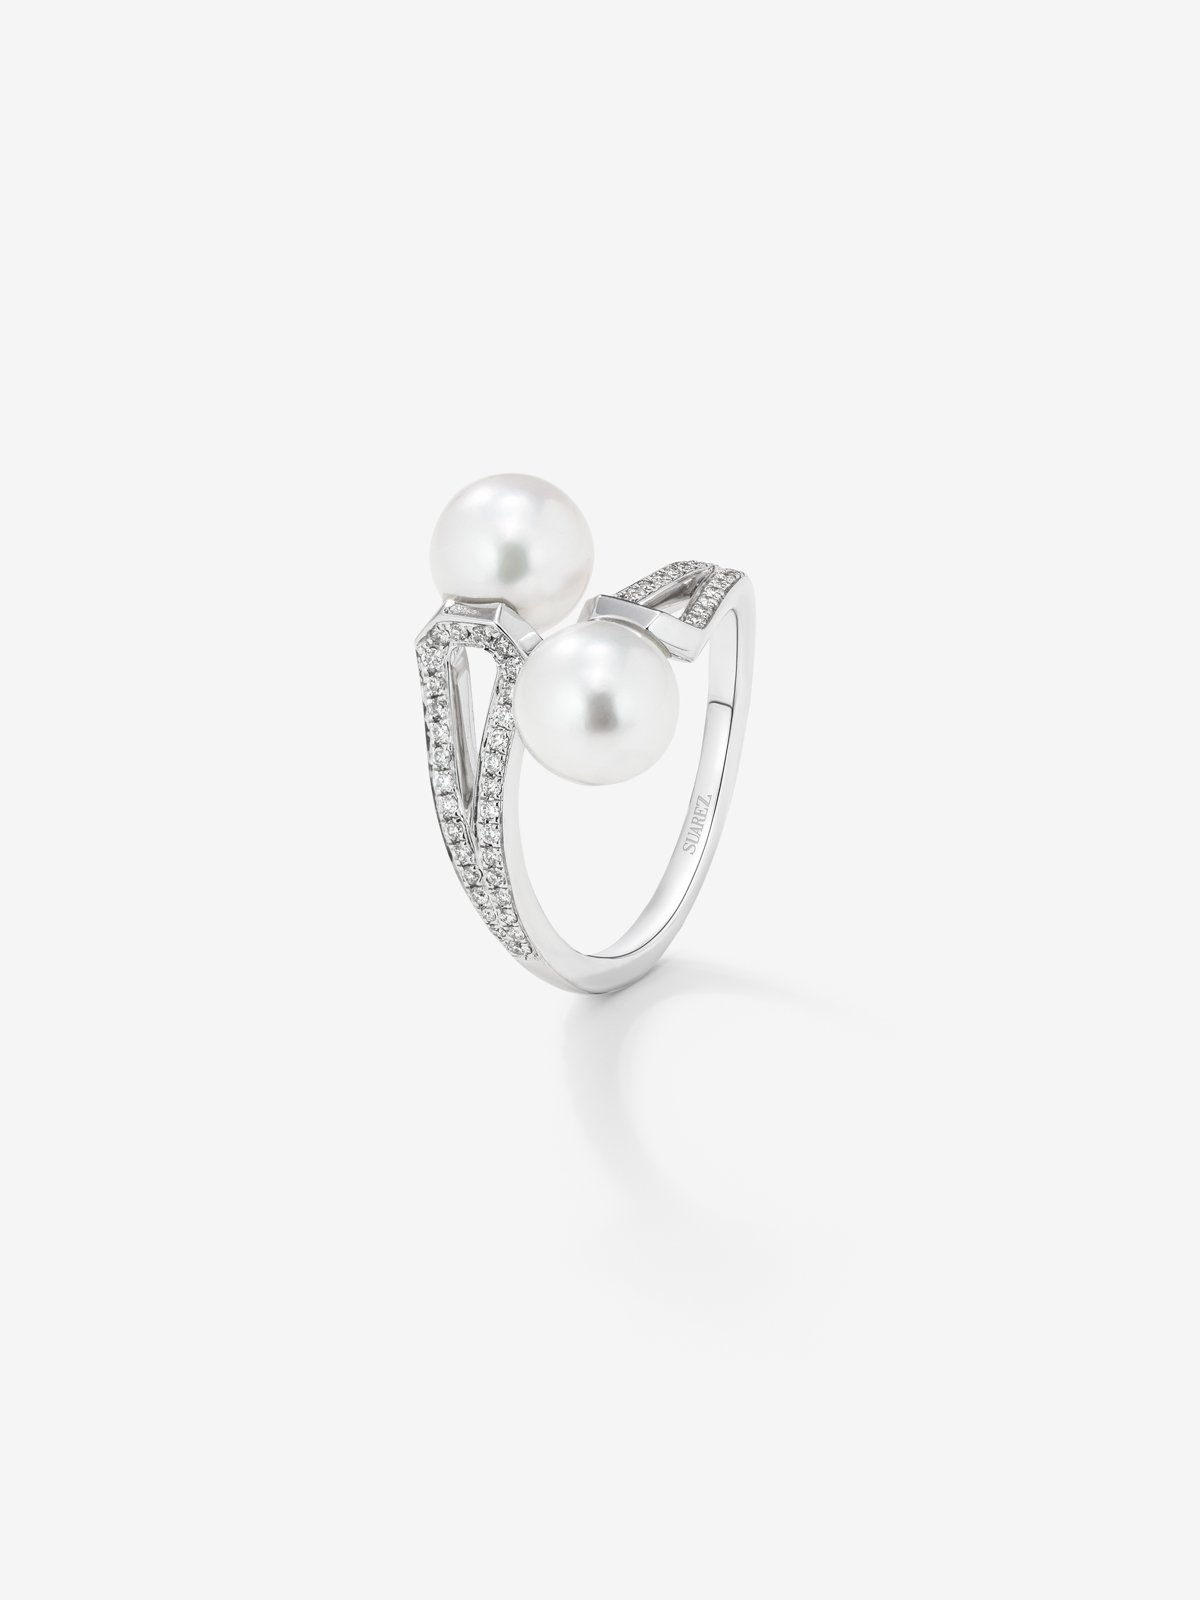 You and I 18k White Gold Ring with 7mm Diamonds in 0.22 CTS Akoya pearls